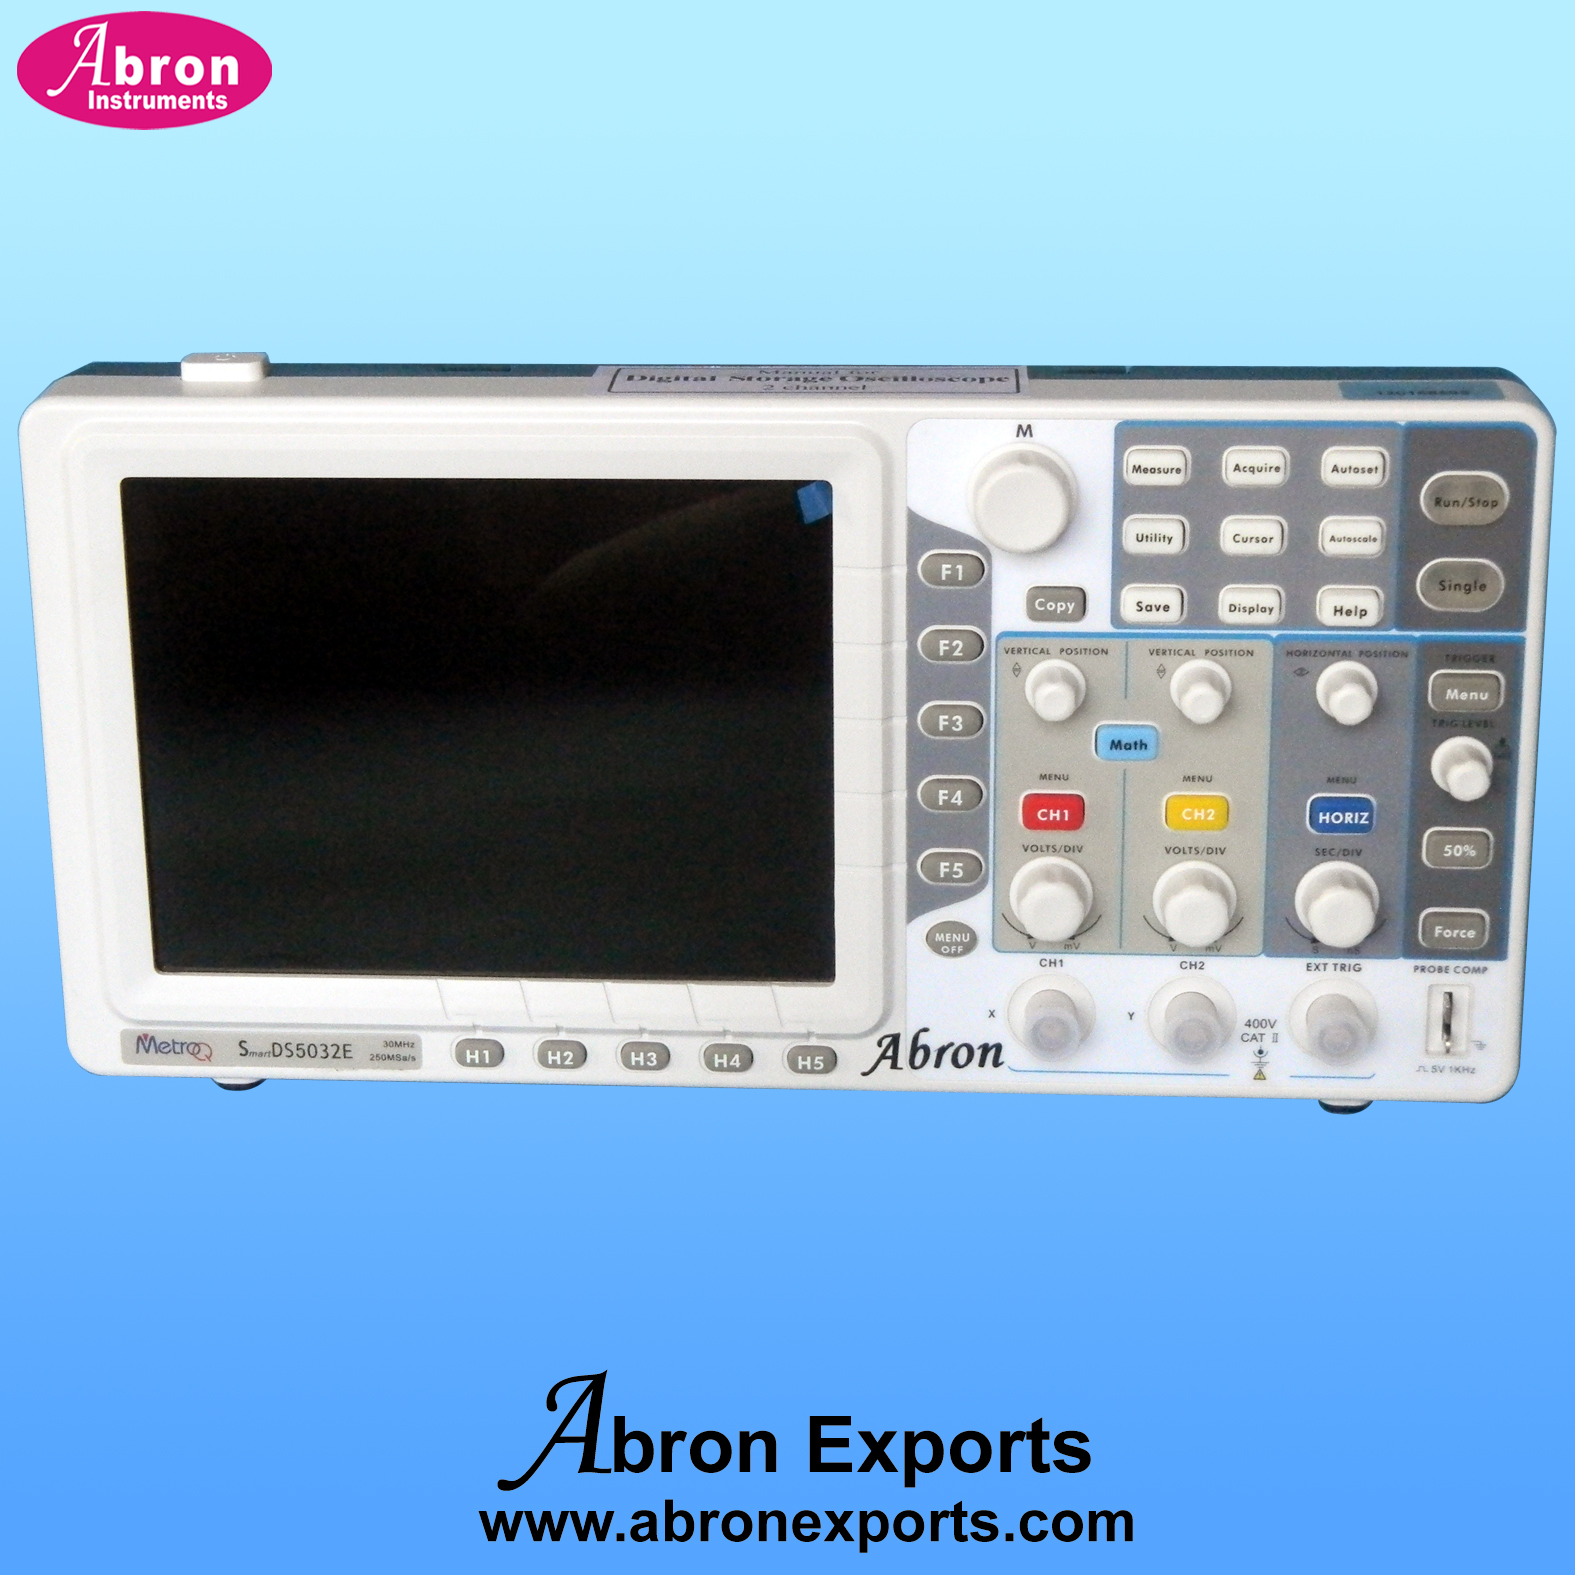 CRO Oscilloscope 60 MHz storage 2 channel TFT Screen 7inch 20cm Digital Storage frequency counter with BNC probes with software etc AE-1341D60